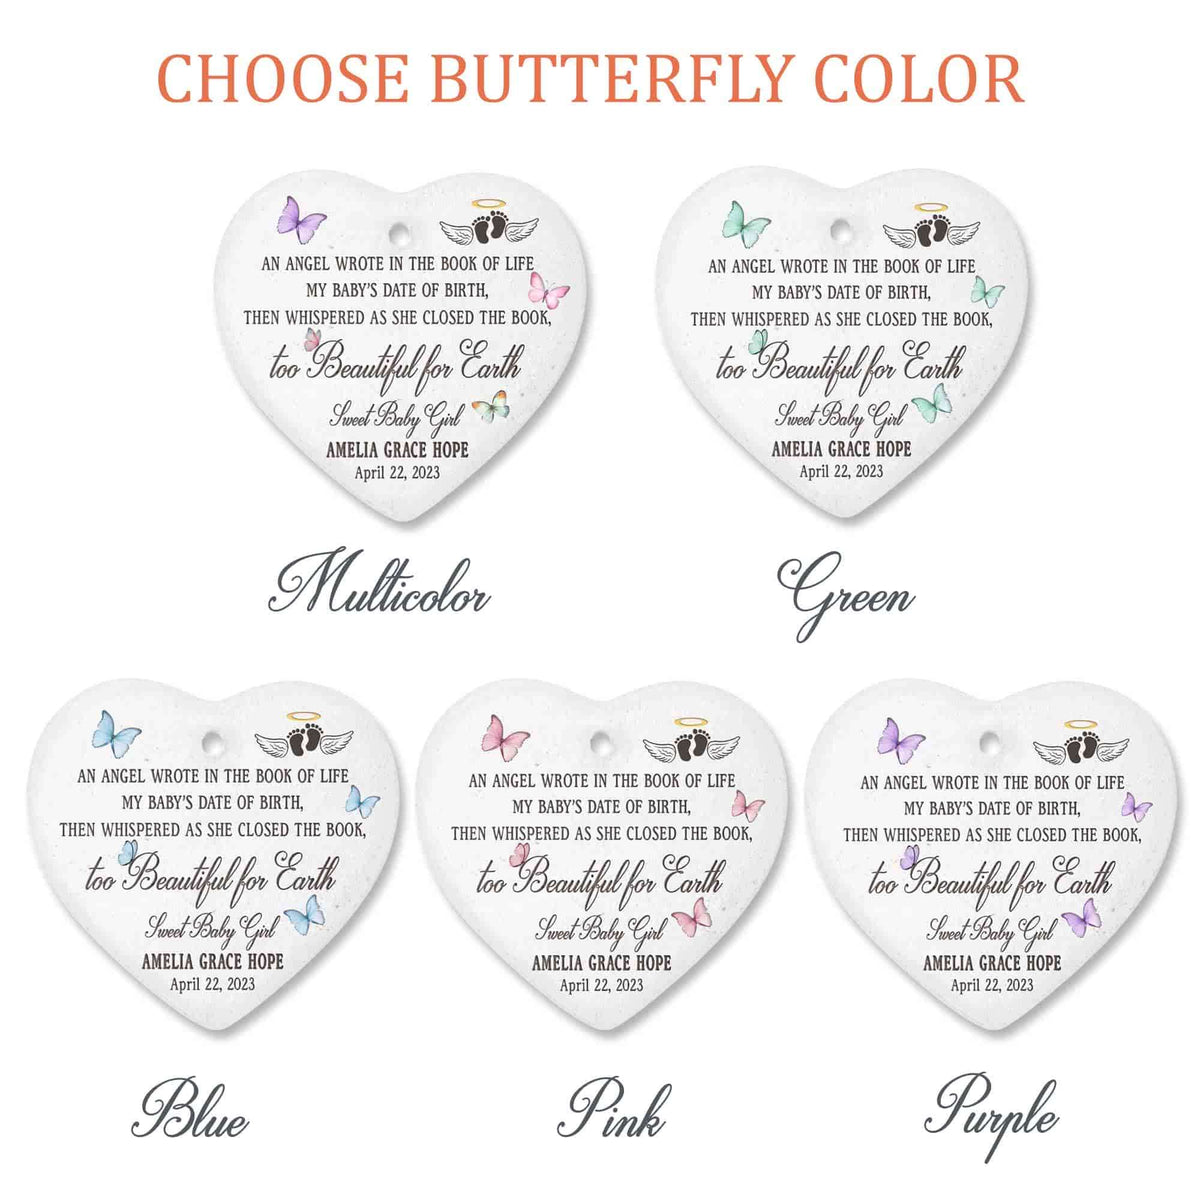 Too Beautiful For Earth Butterfly Memorial Ceramic Heart Ornaments